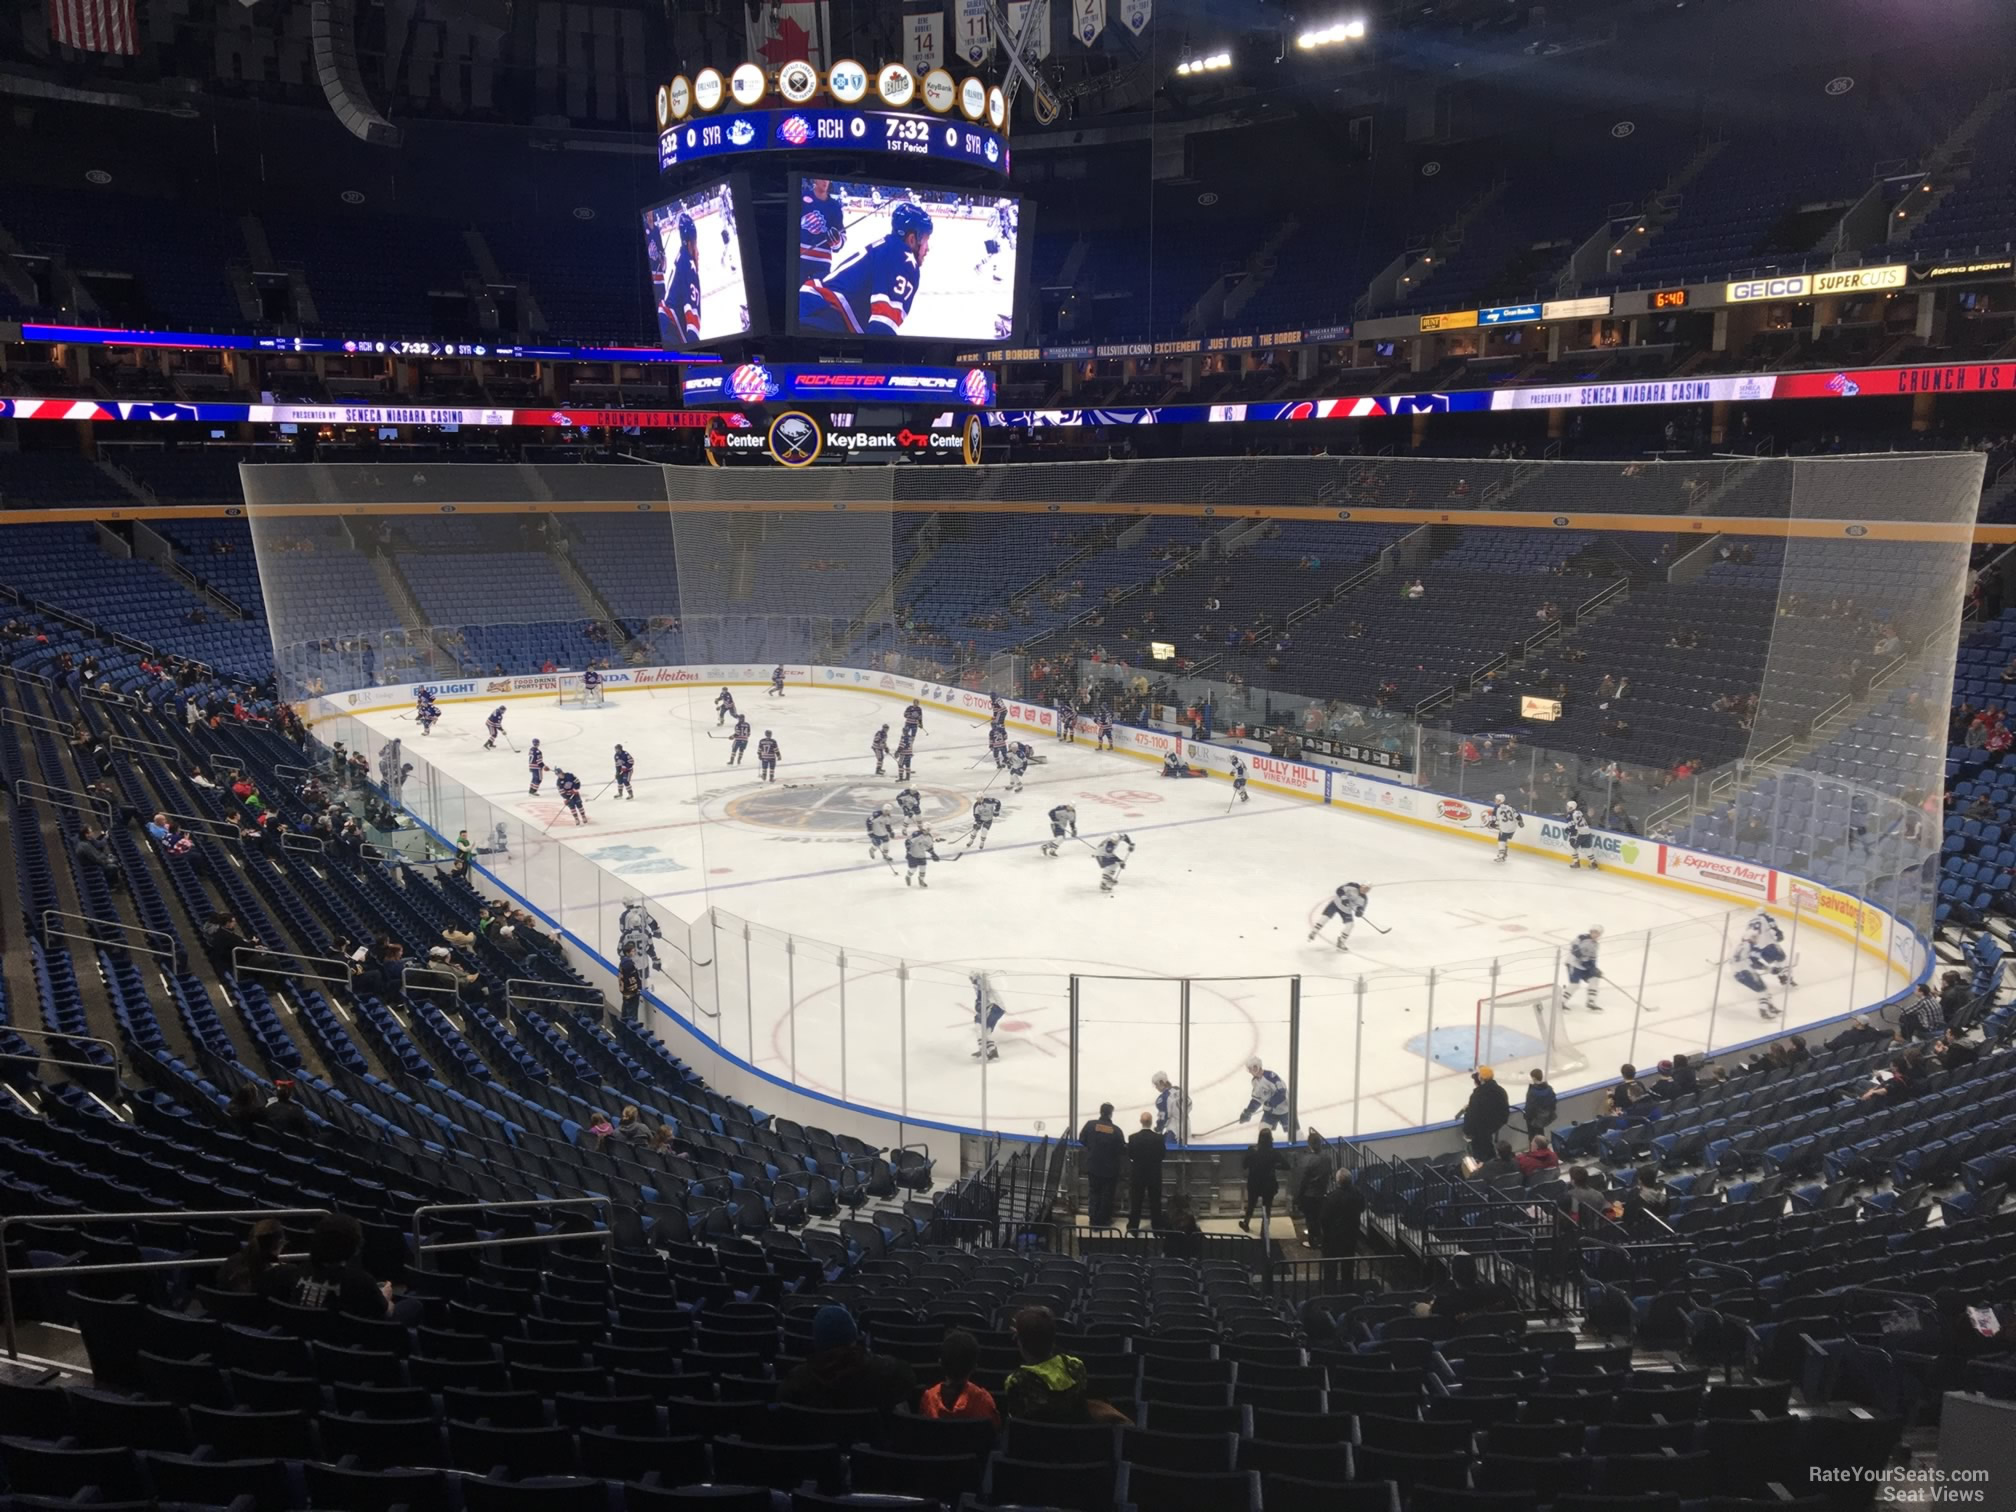 section 113, row 22 seat view  for hockey - keybank center